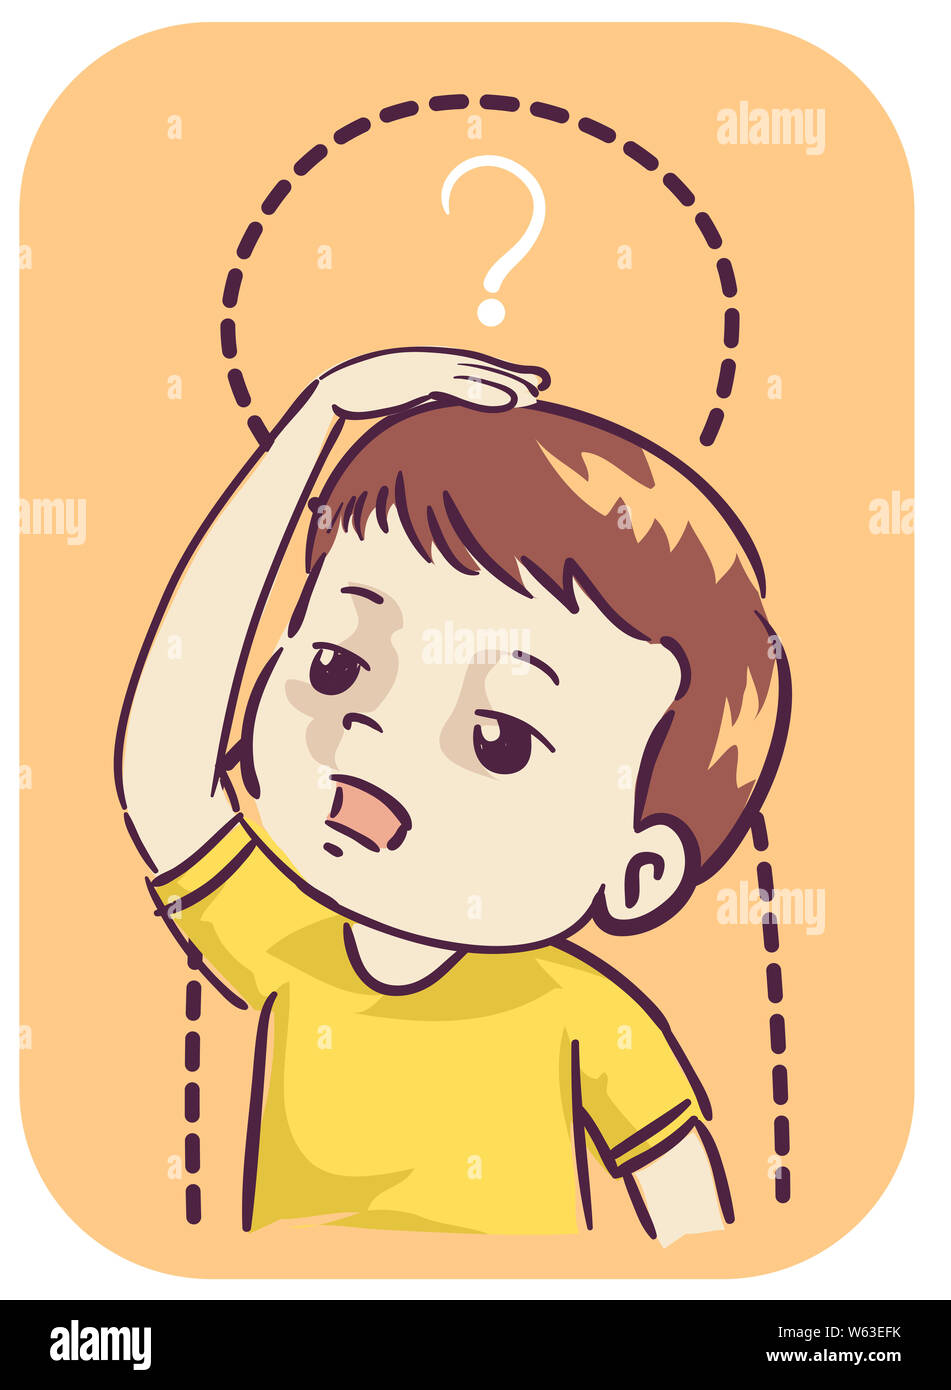 Illustration of a Kid Boy with Stalled Growth and Development Stock Photo